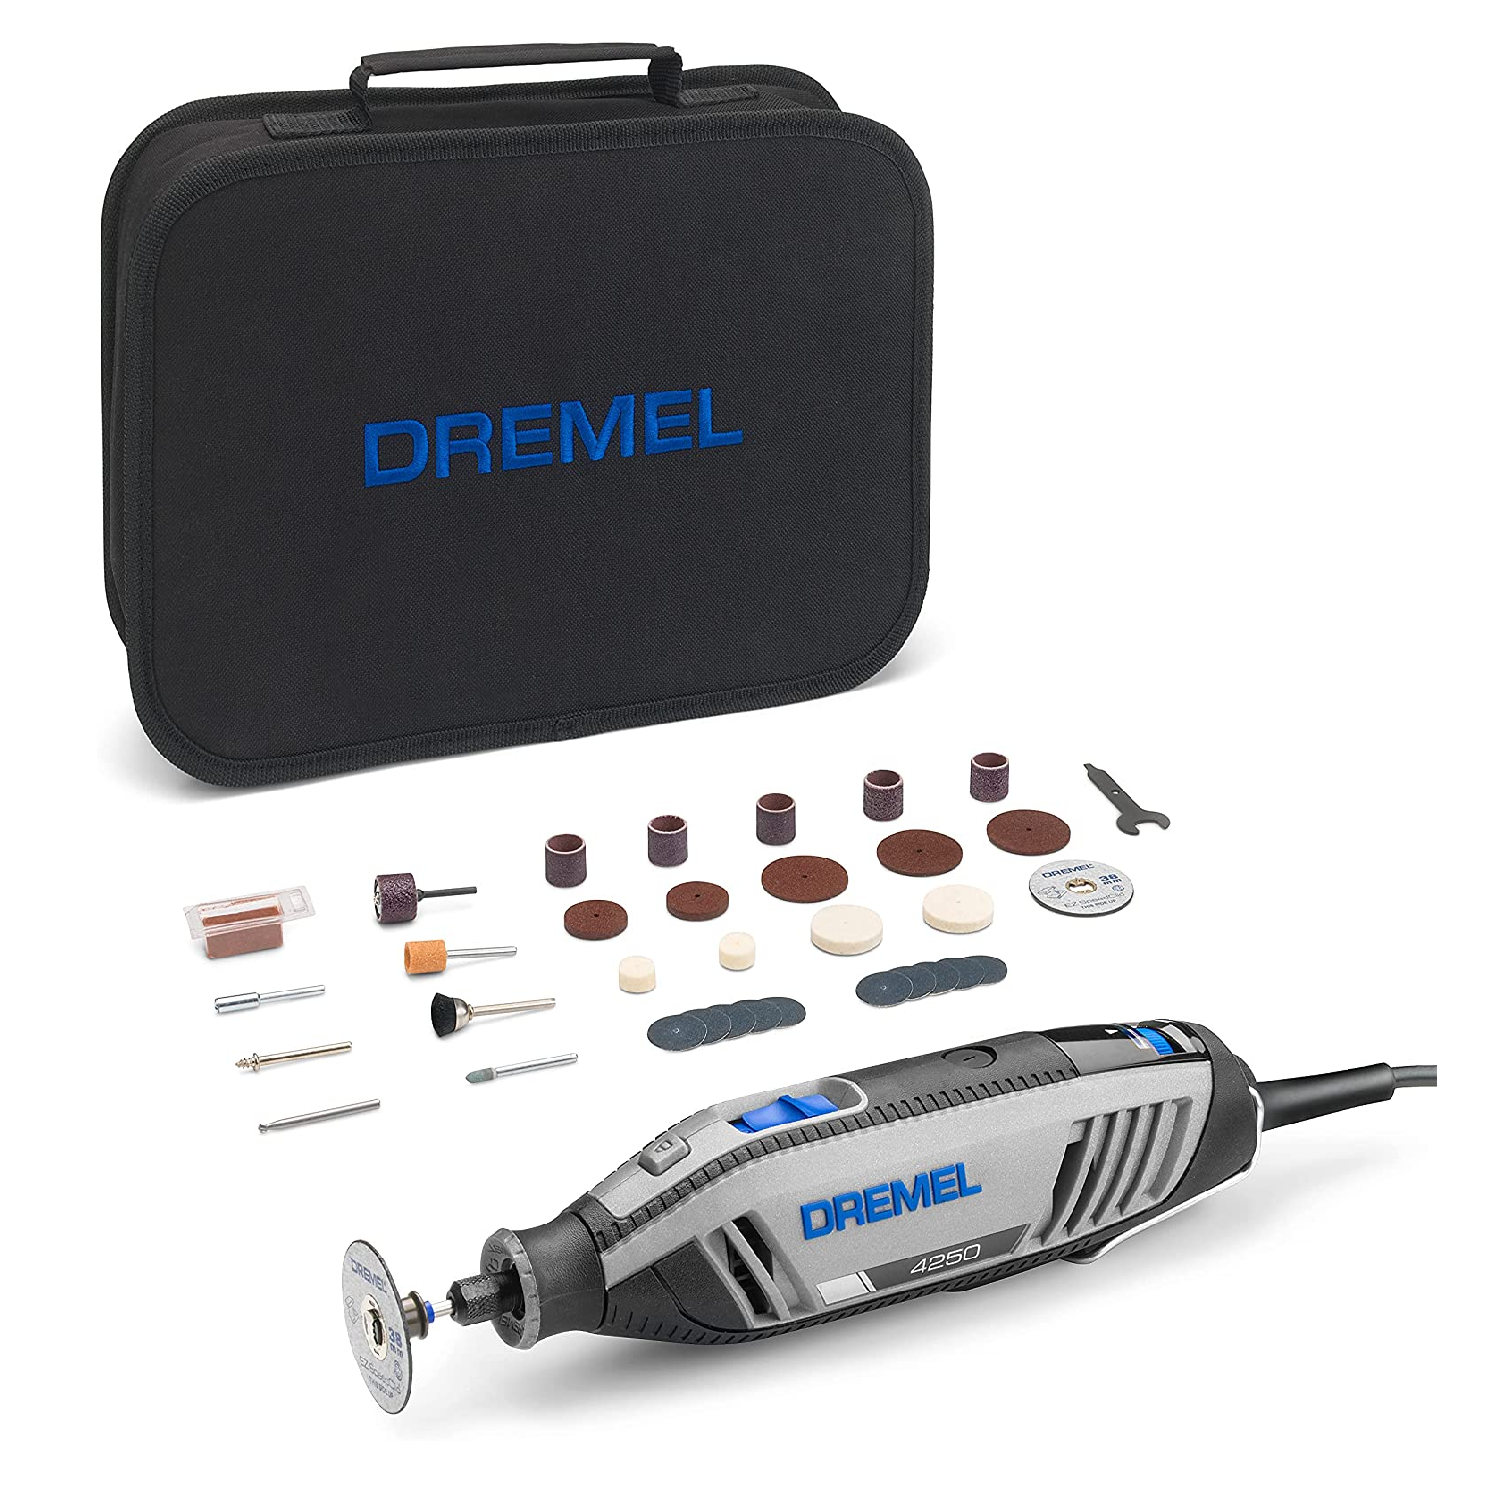 Dremel 4250 Rotary Tool With 35 Accessories Kit DRE4250-35